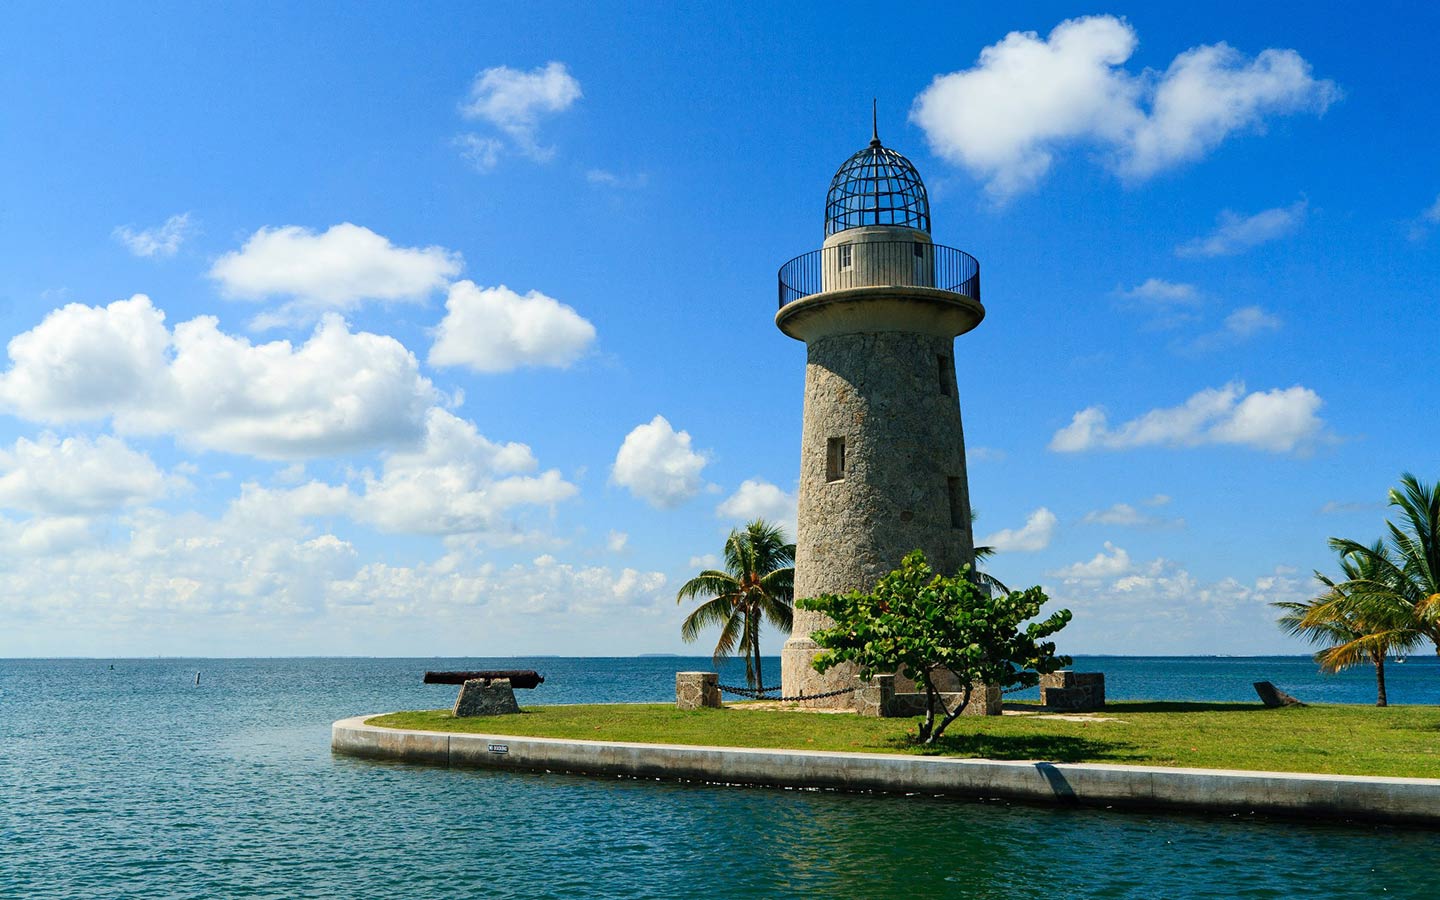 View of Boca Chita Lighthouse from Biscayne National Park